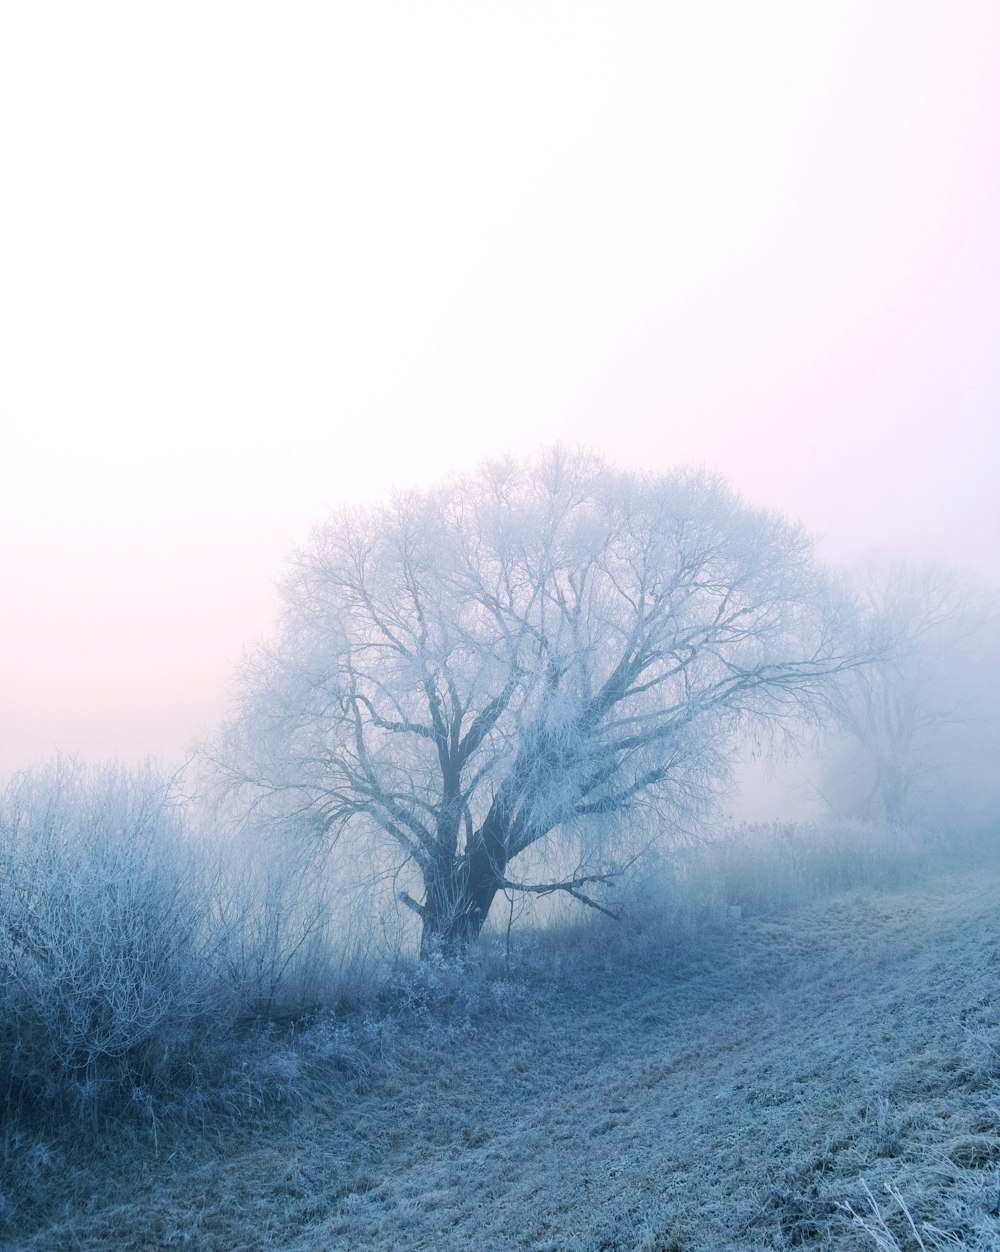 tree surrounded by fogs